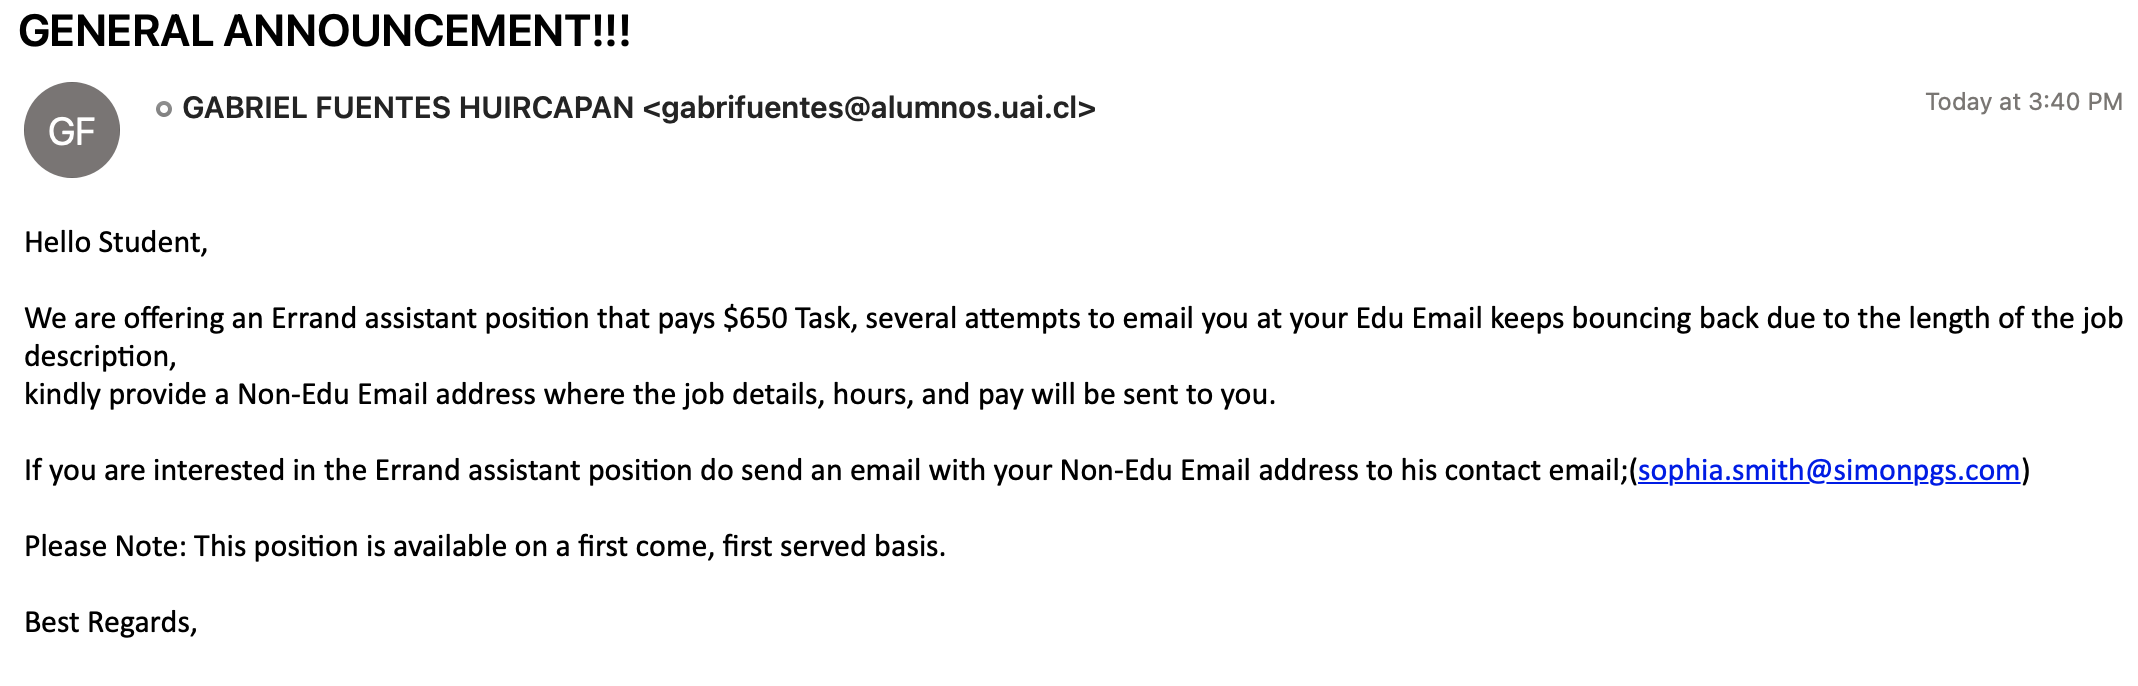 Image of fake job offer targeting students for 'errand assistant' requesting non-educational email address.